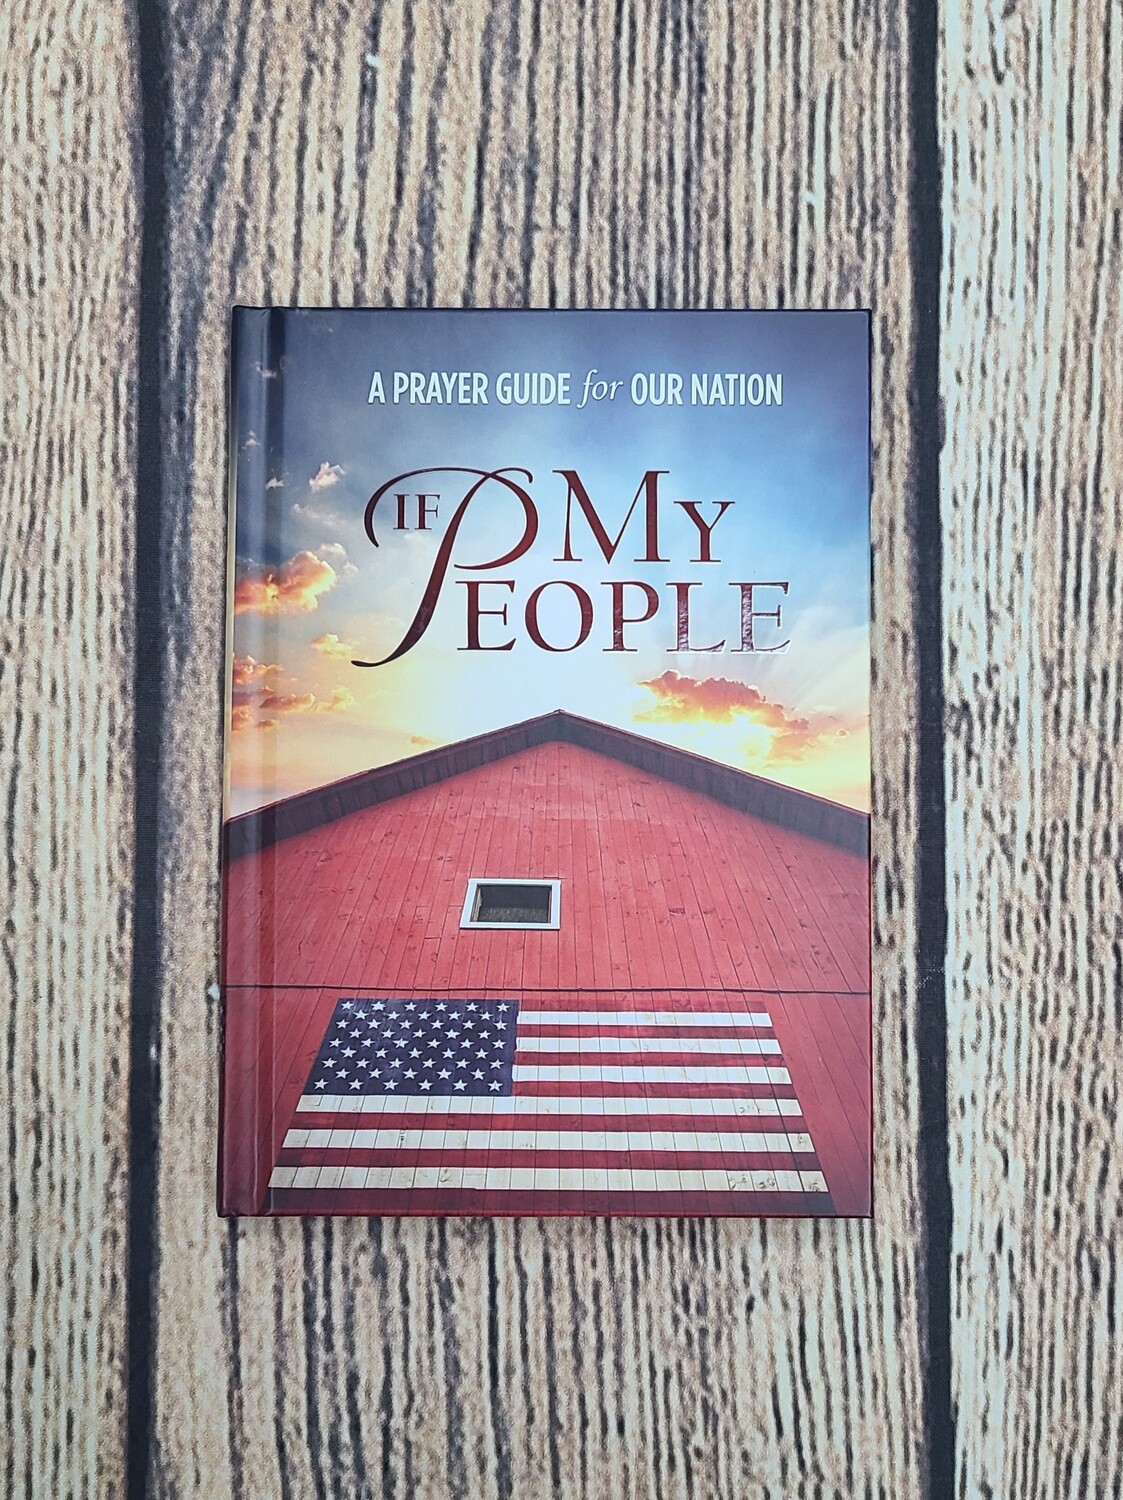 If My People: A Prayer Guide for Our Nation by Thomas Nelson